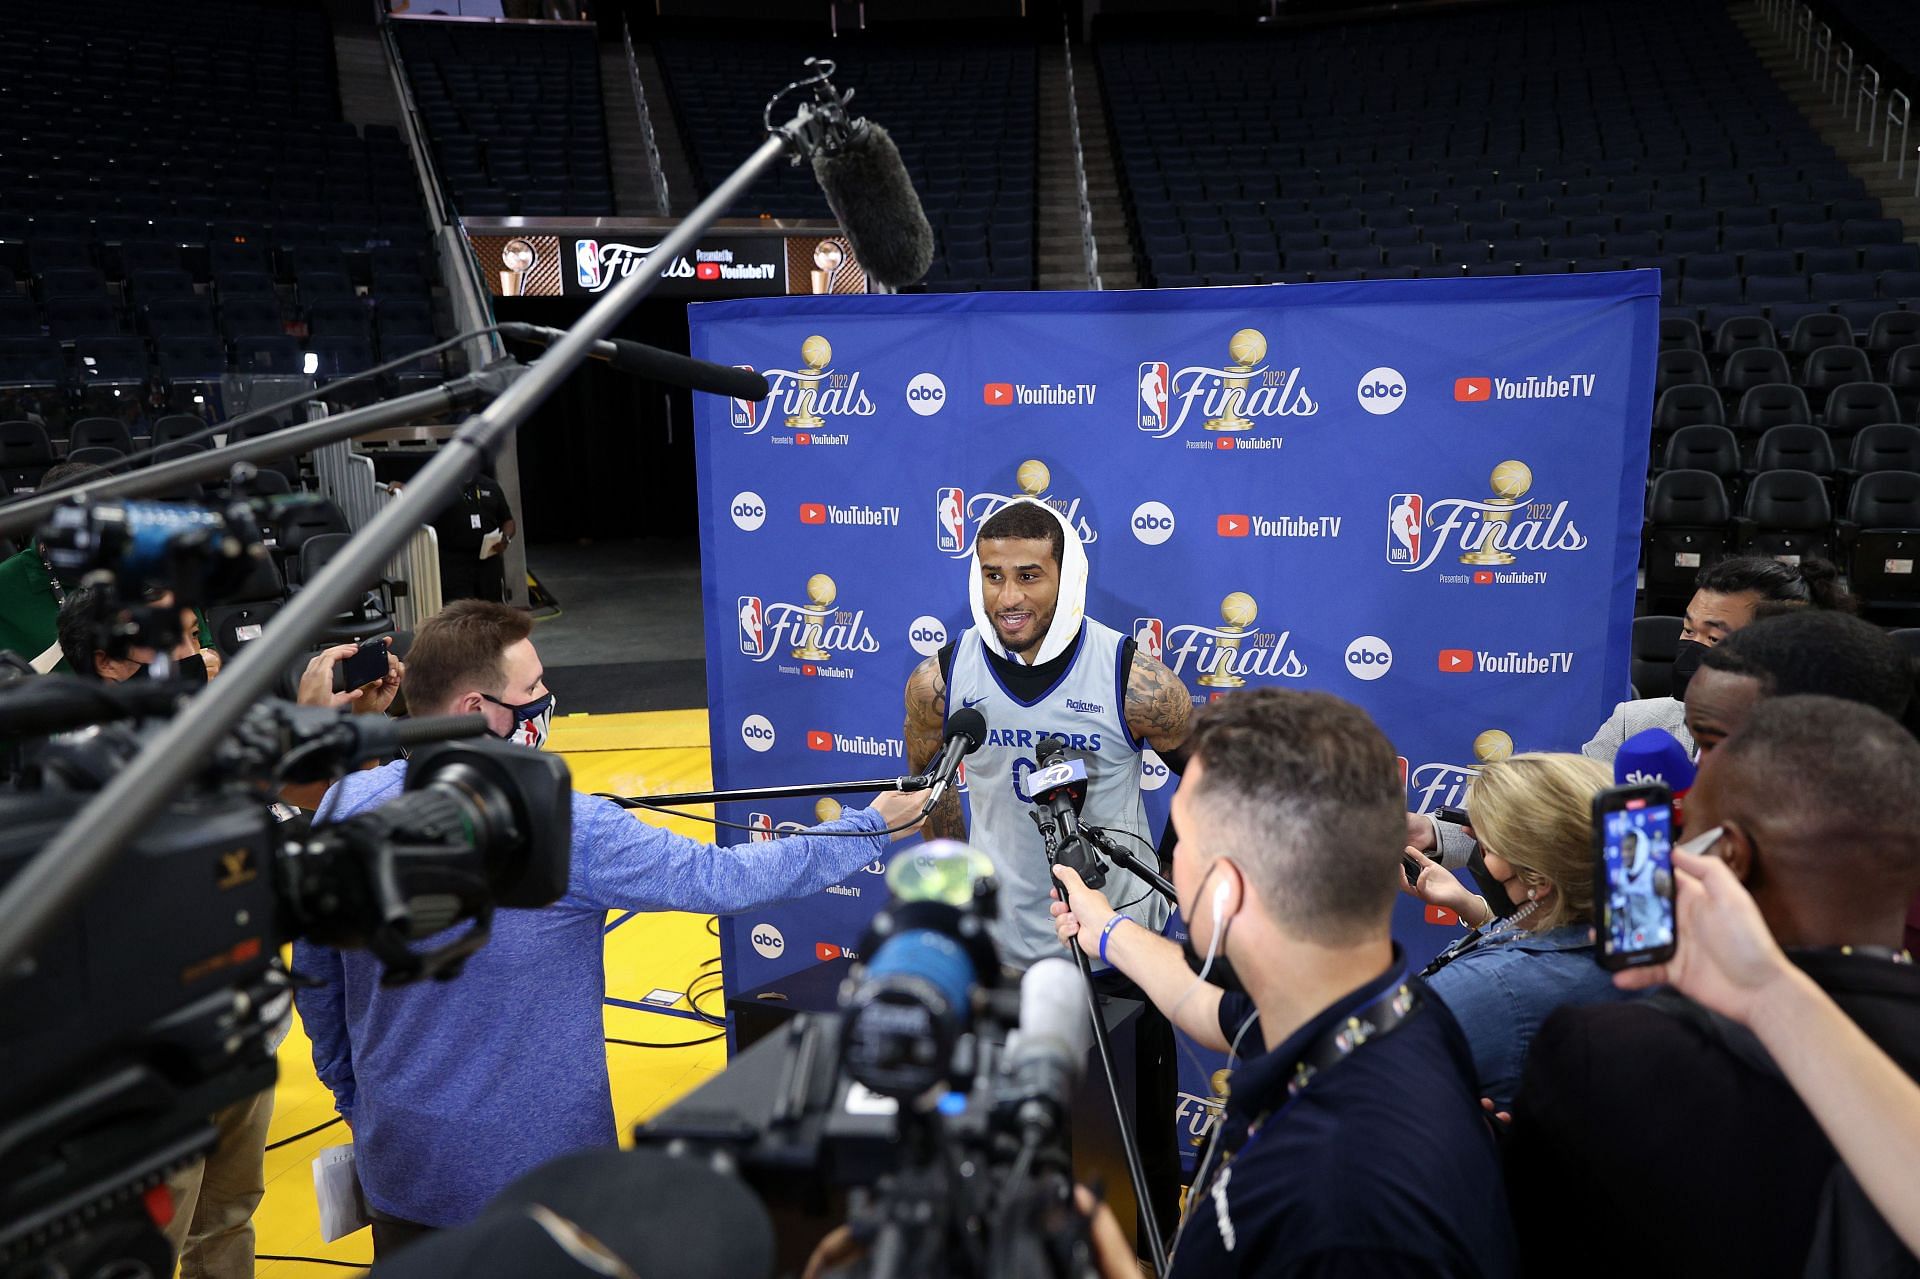 Gary Payton II of the Golden State Warriors interviewed on 2022 NBA Finals media day